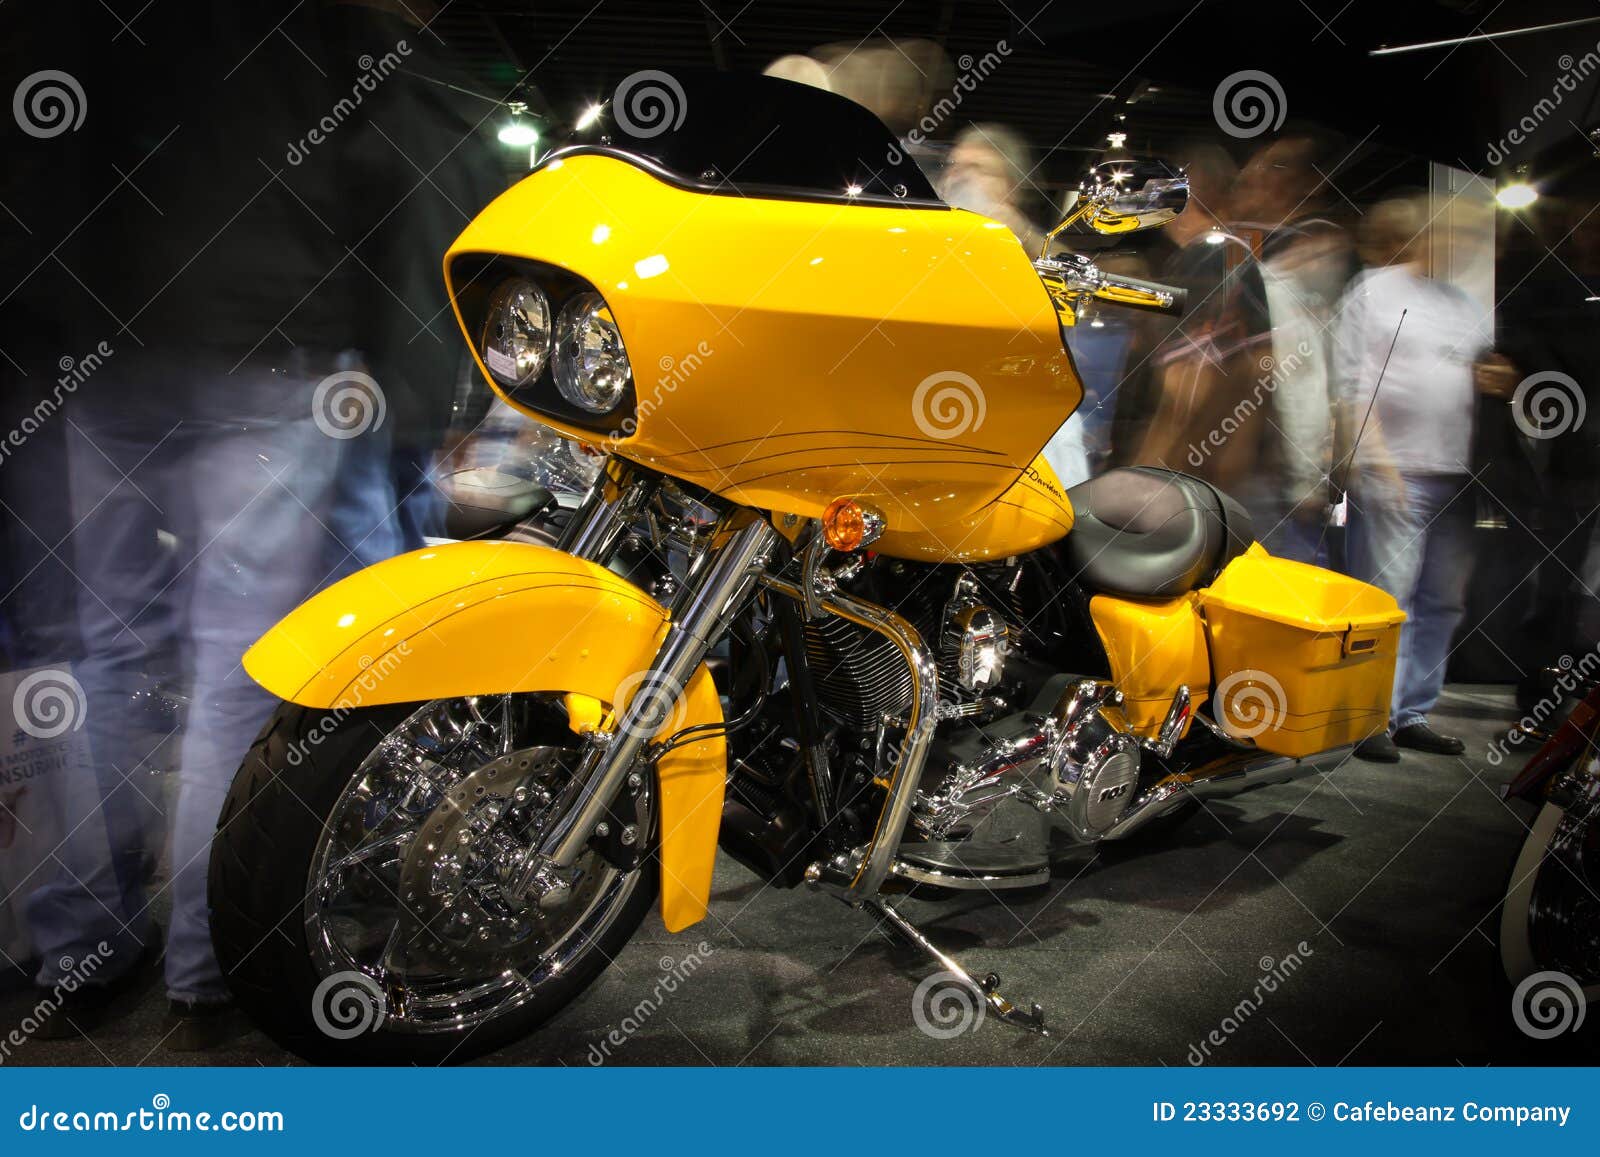 Chicago Motorcycle Show - Motion Blur Editorial Photography - Image of